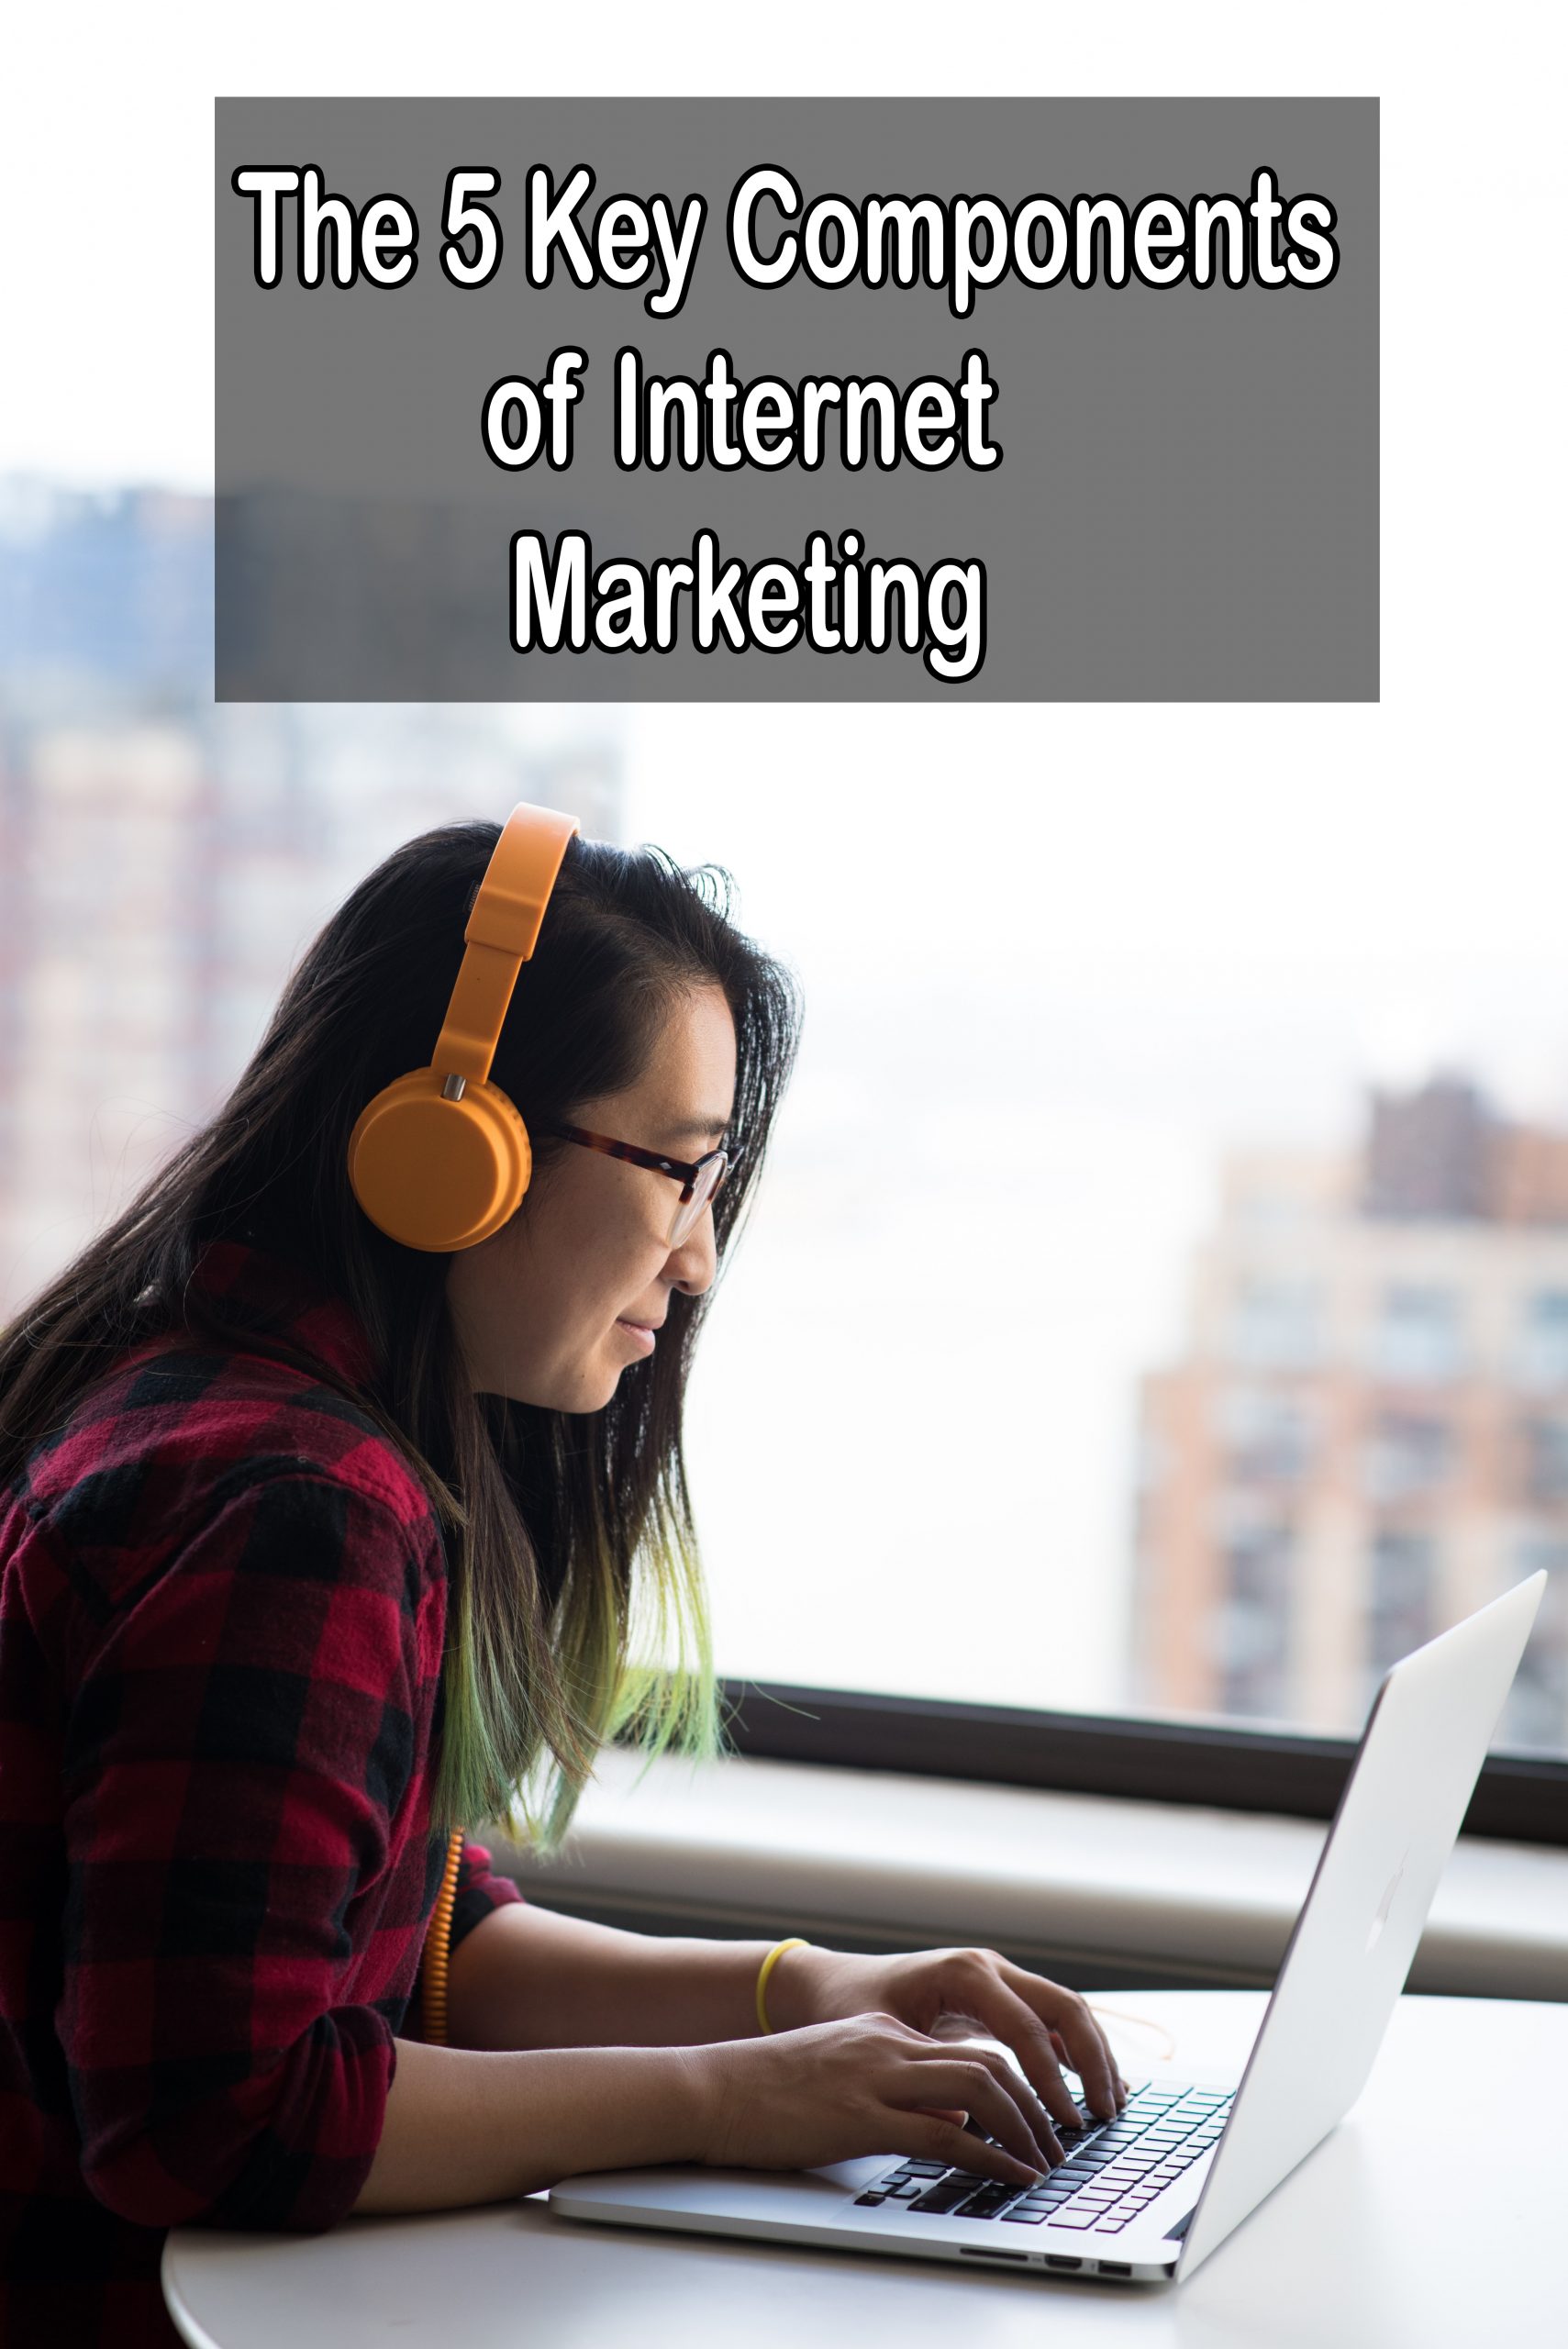 The 5 Key Components of Internet Marketing